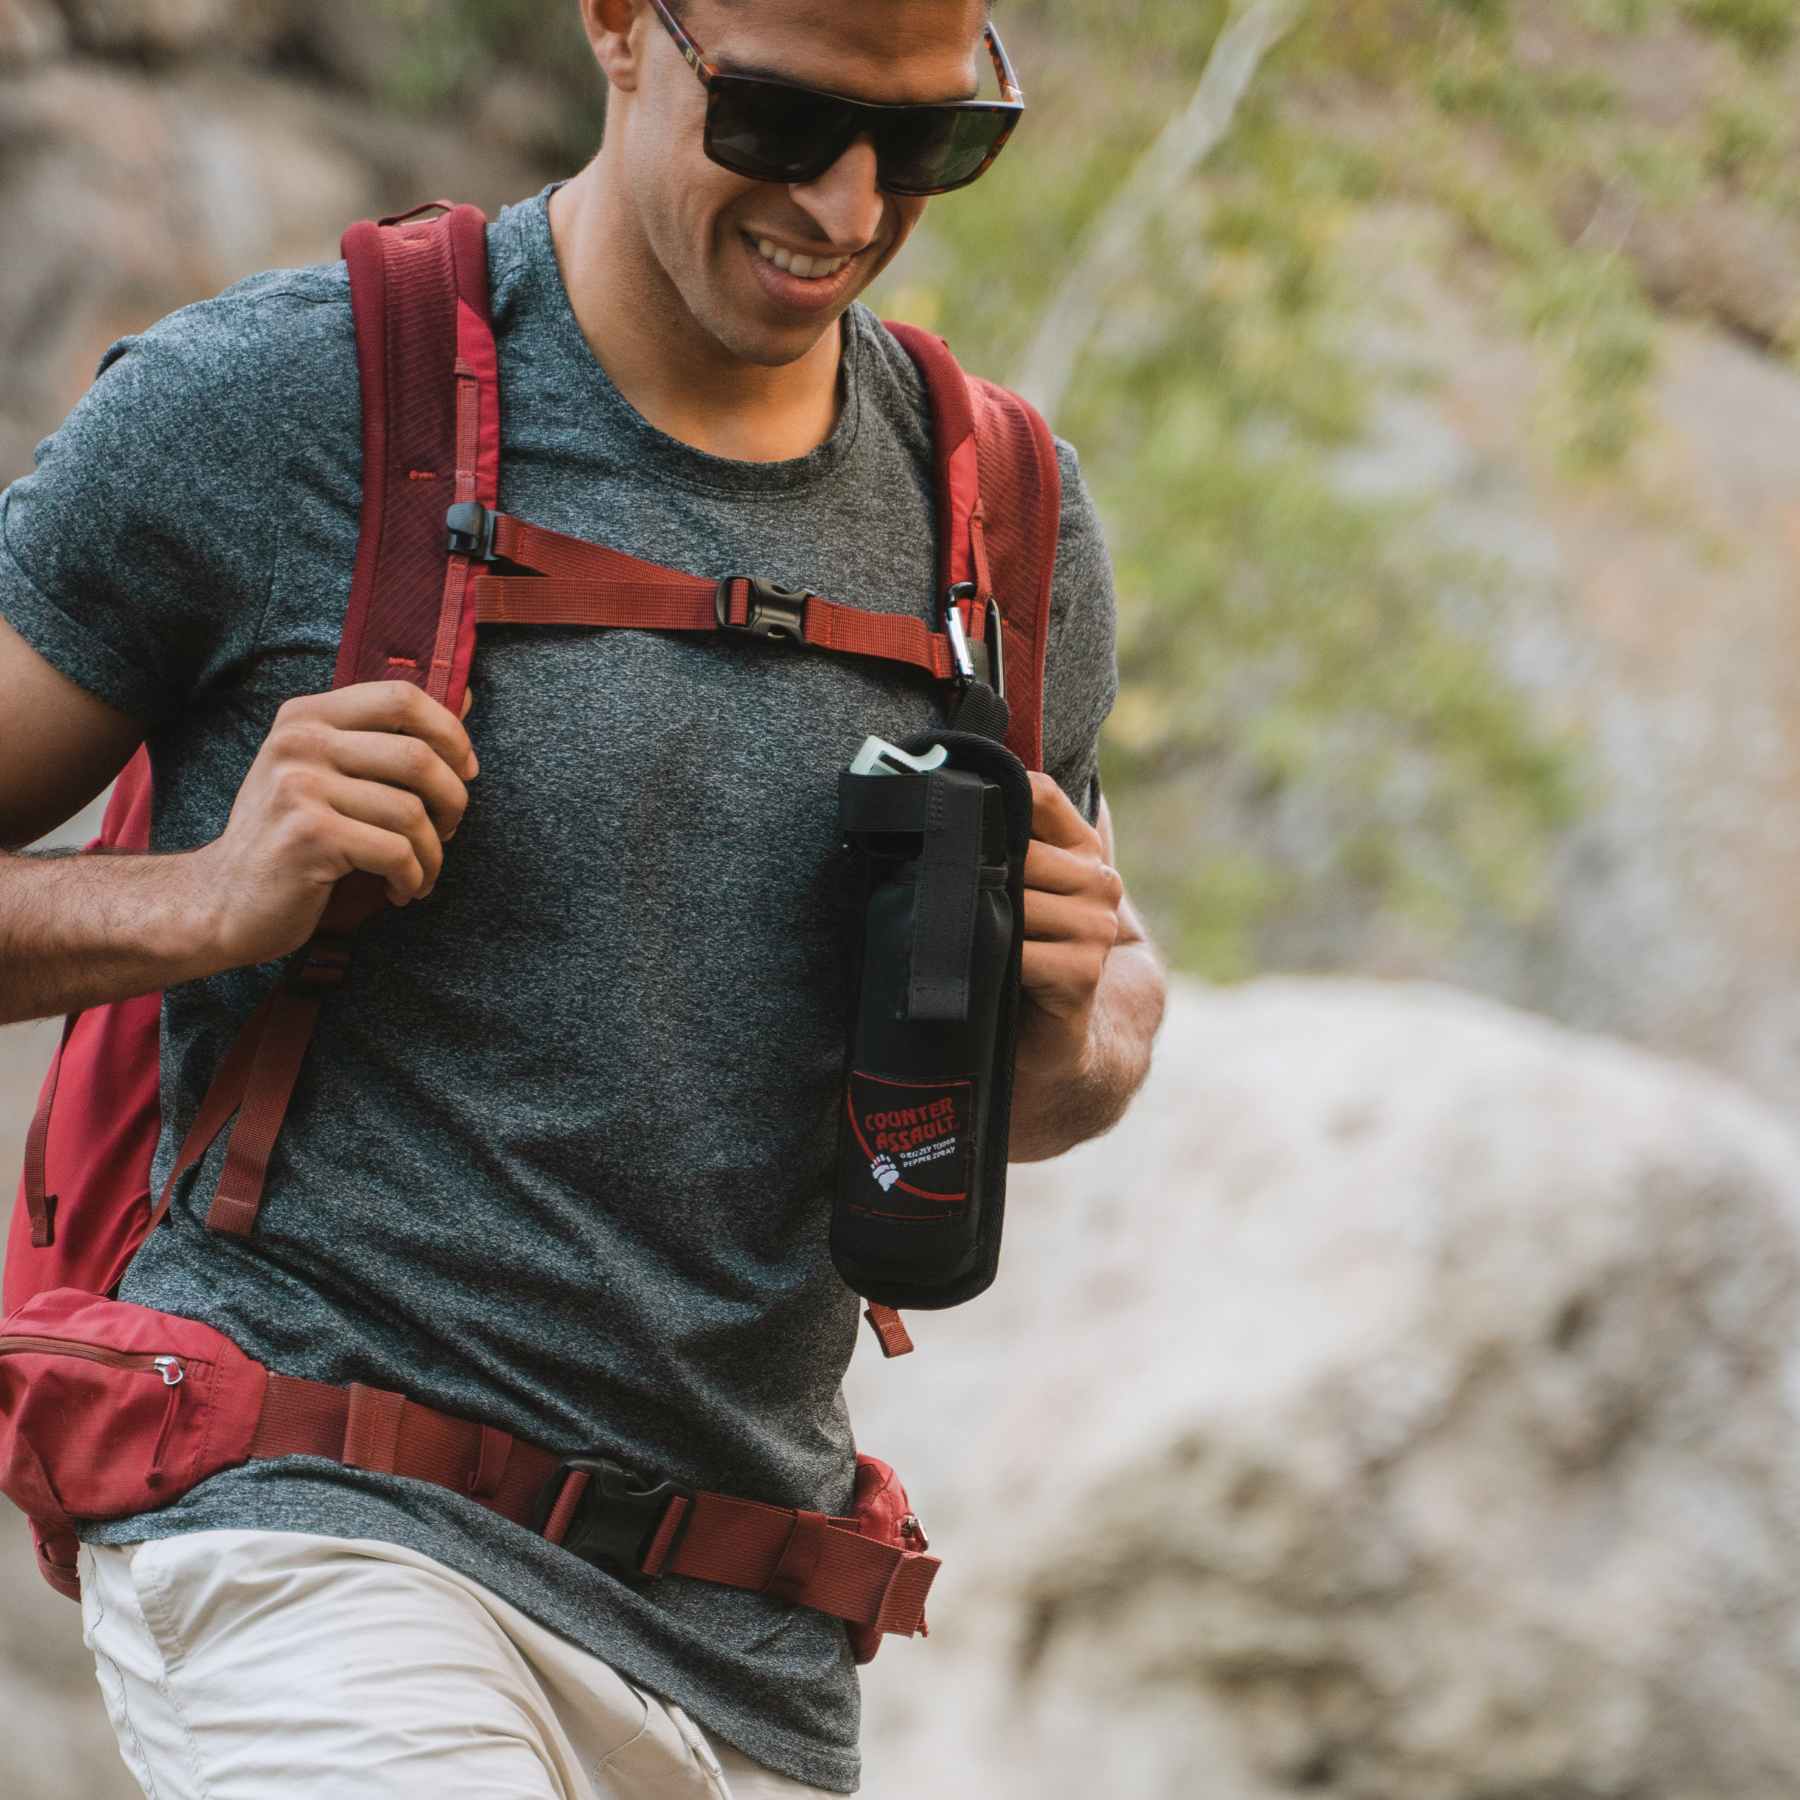 Man walking with a bear spray holster attached to bag